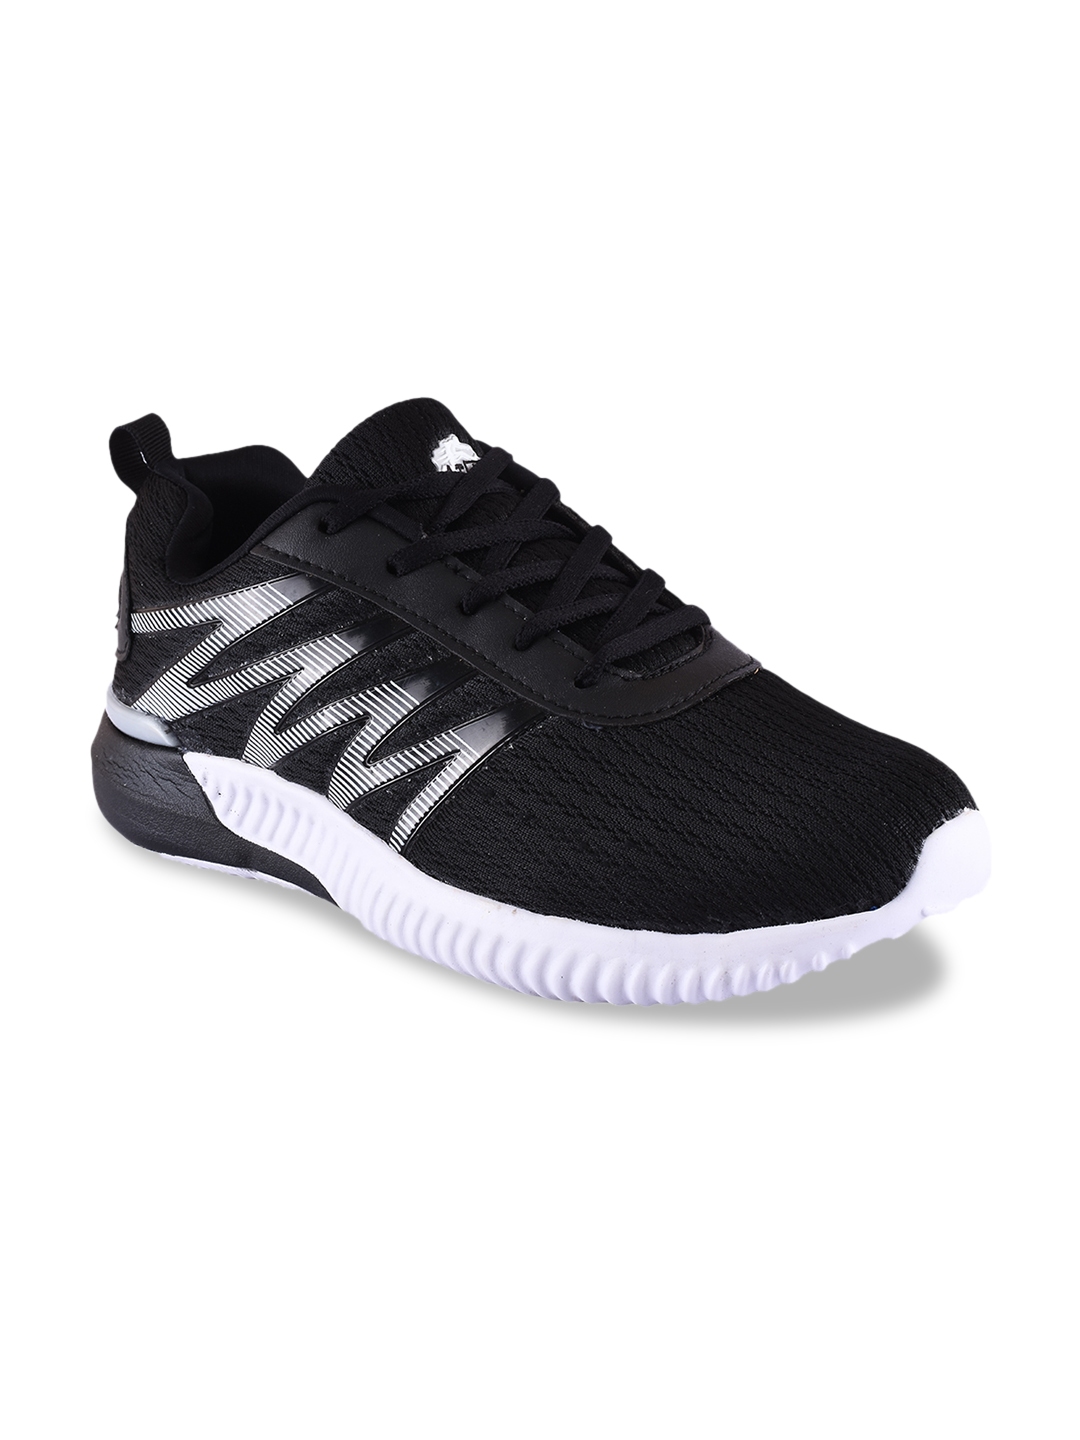 Buy Action Men Black Synthetic Running Shoes - Sports Shoes for Men ...